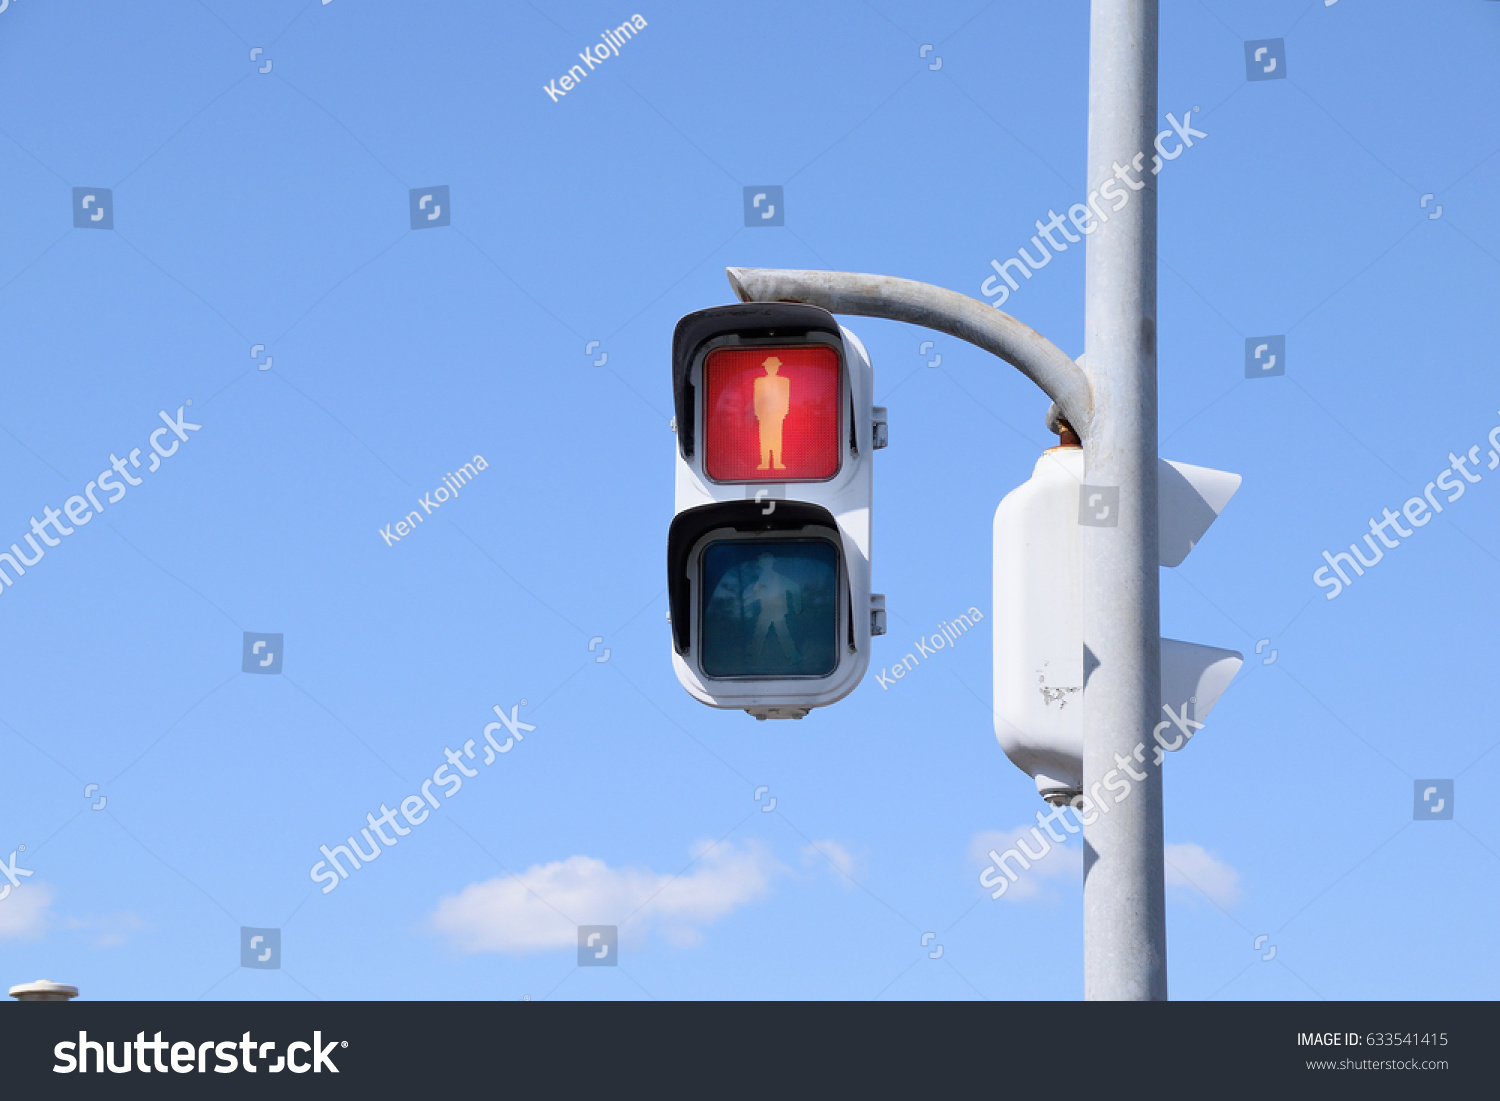 Signals for pedestrians in Japan. The red light means stop.
 #633541415